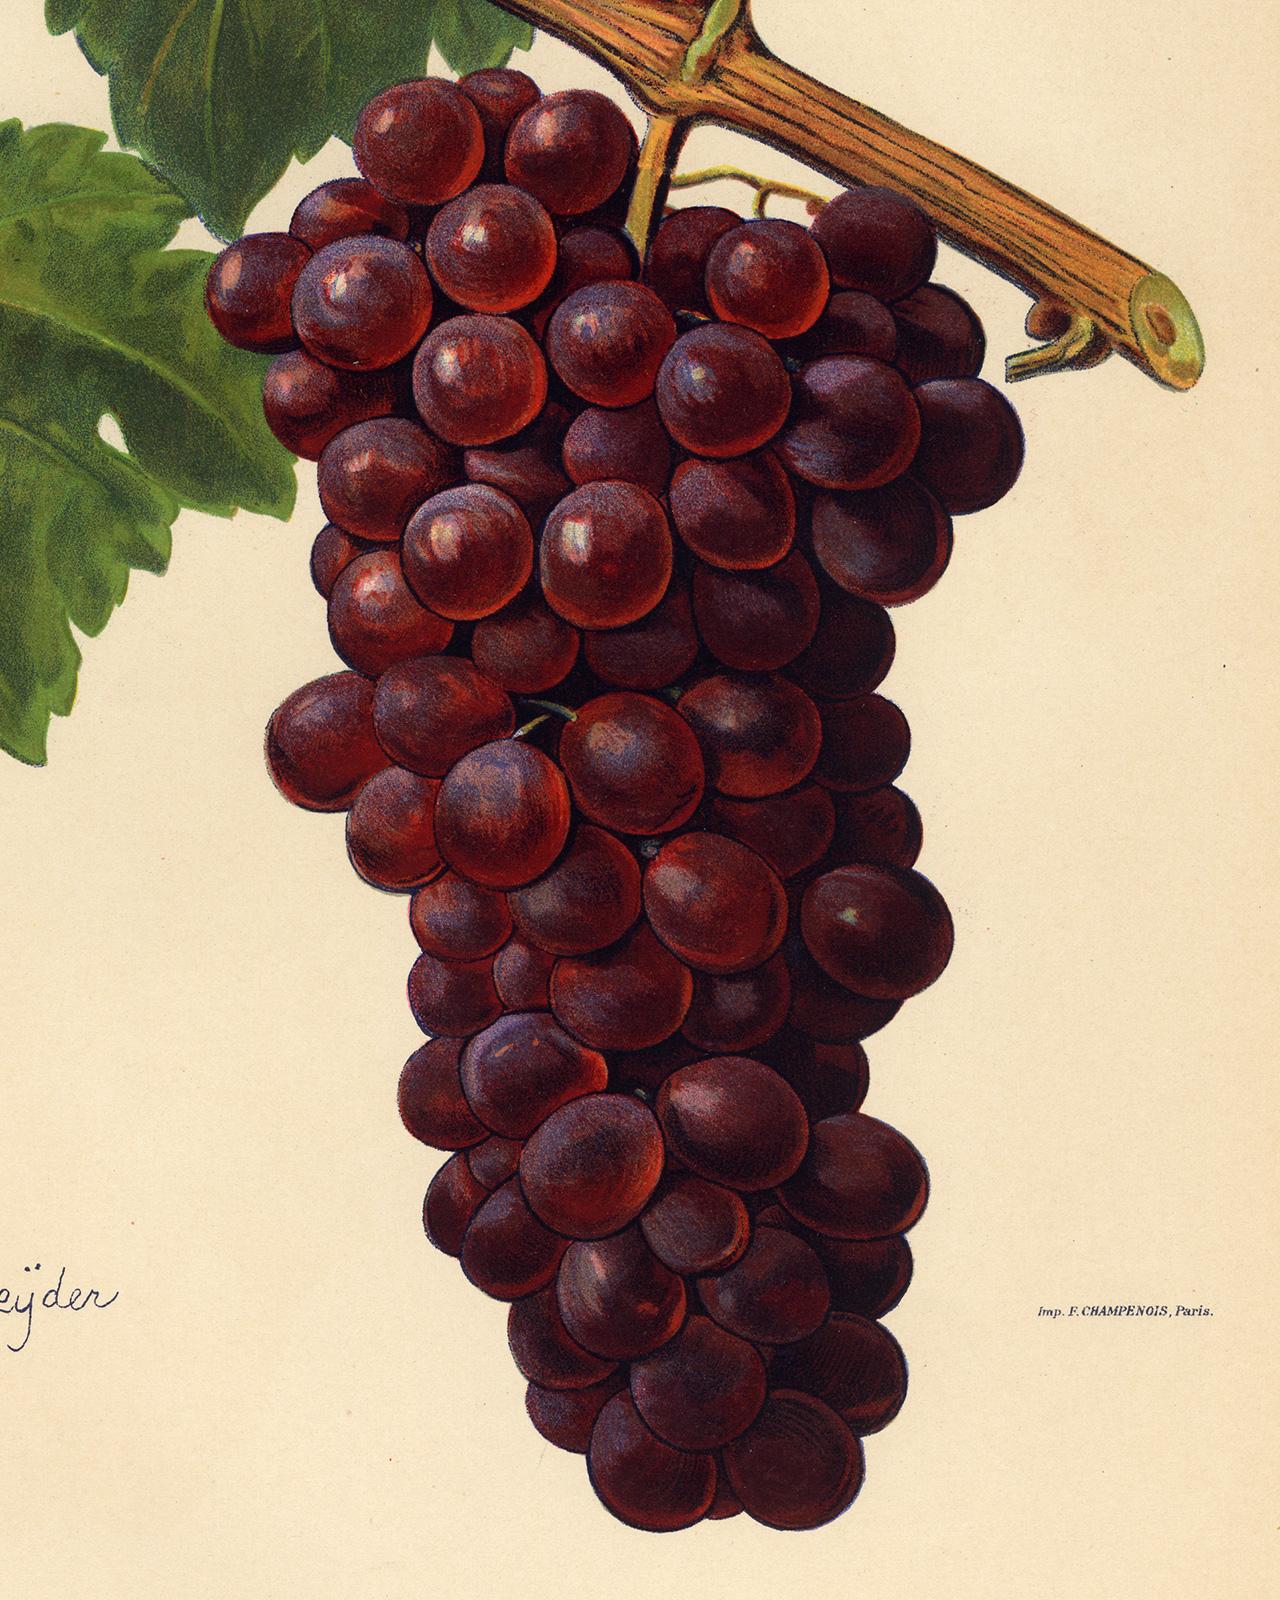 The Romanka grape - from Ampelography by Vermorel - Lithograph - Early 20th c. - Contemporary Print by Victor Vermorel